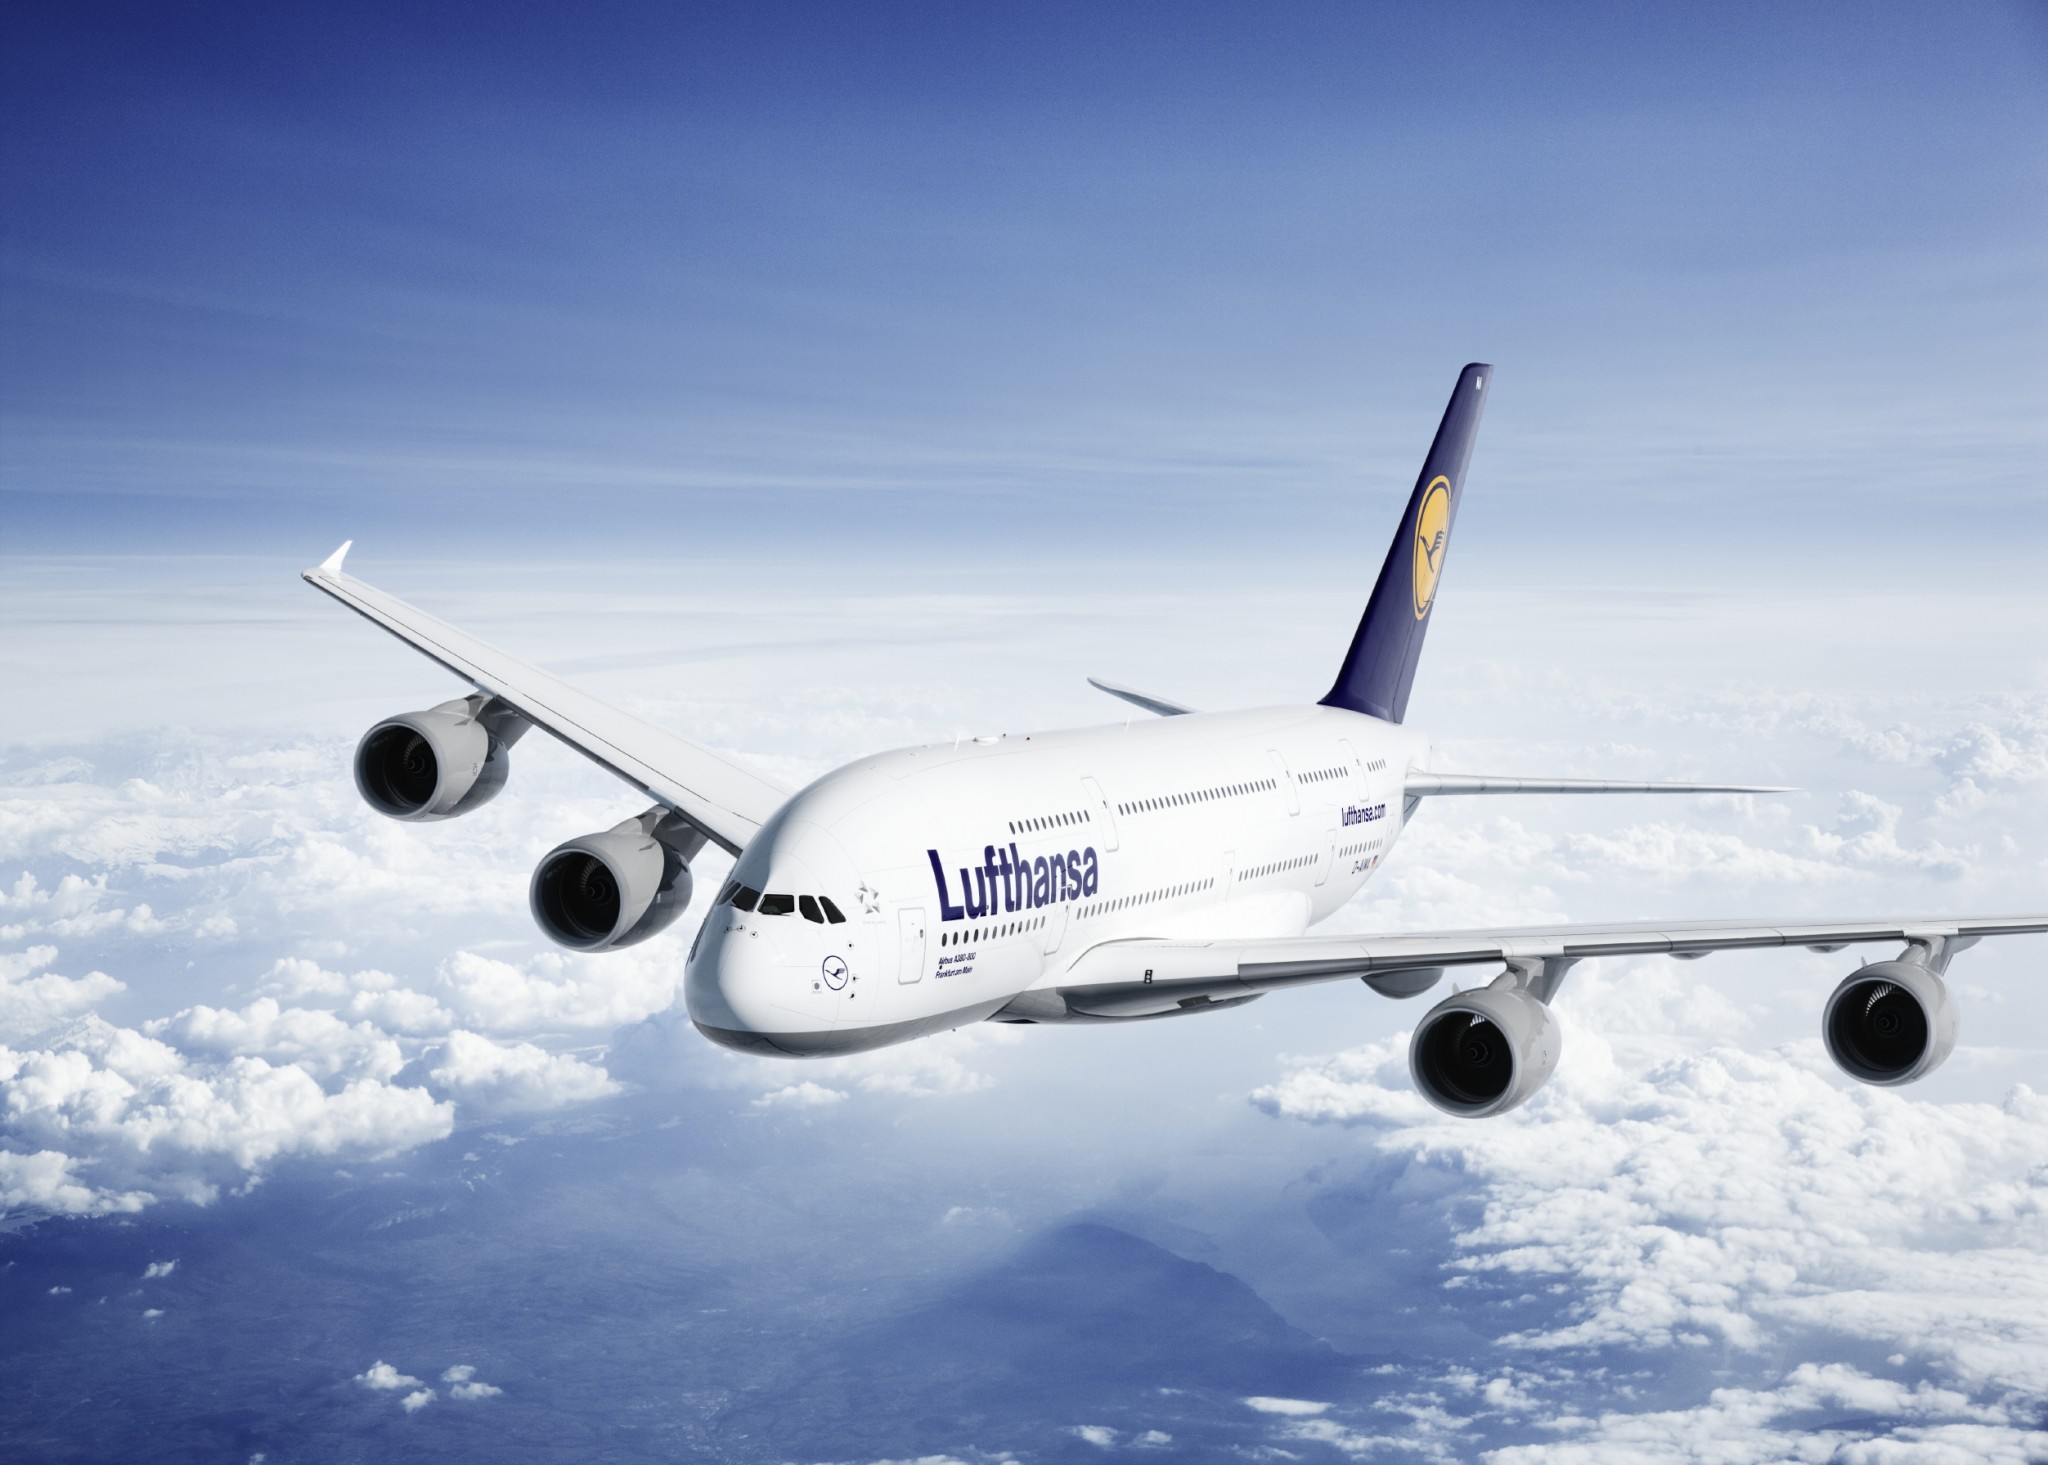 Lufthansa losses widen as fuel costs impact Q1 2019 results